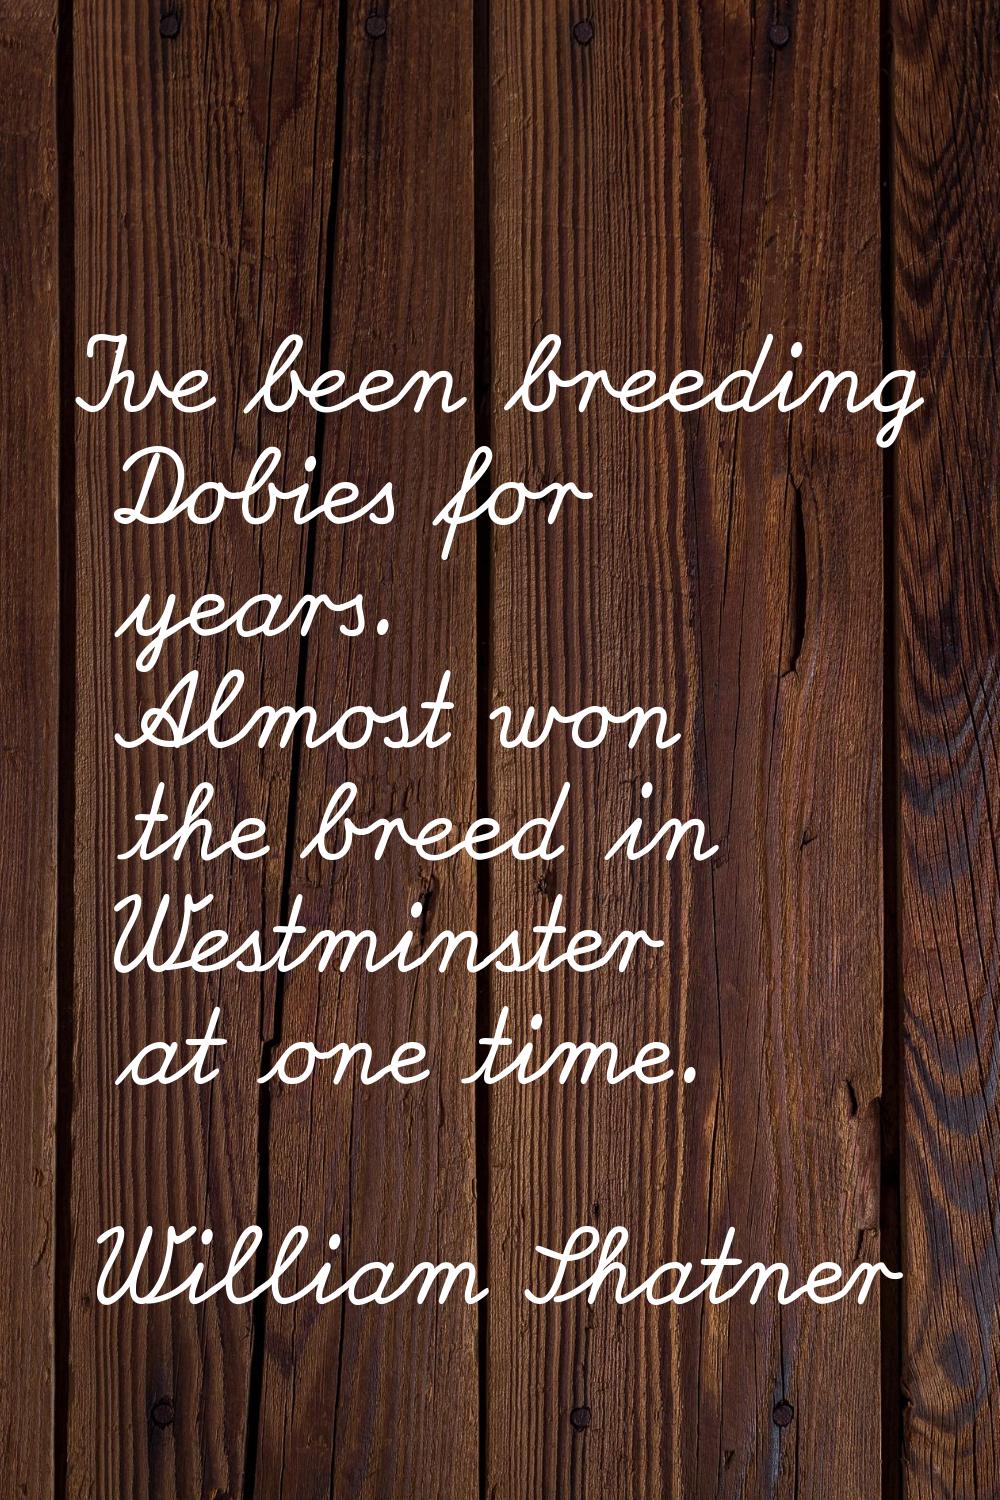 I've been breeding Dobies for years. Almost won the breed in Westminster at one time.